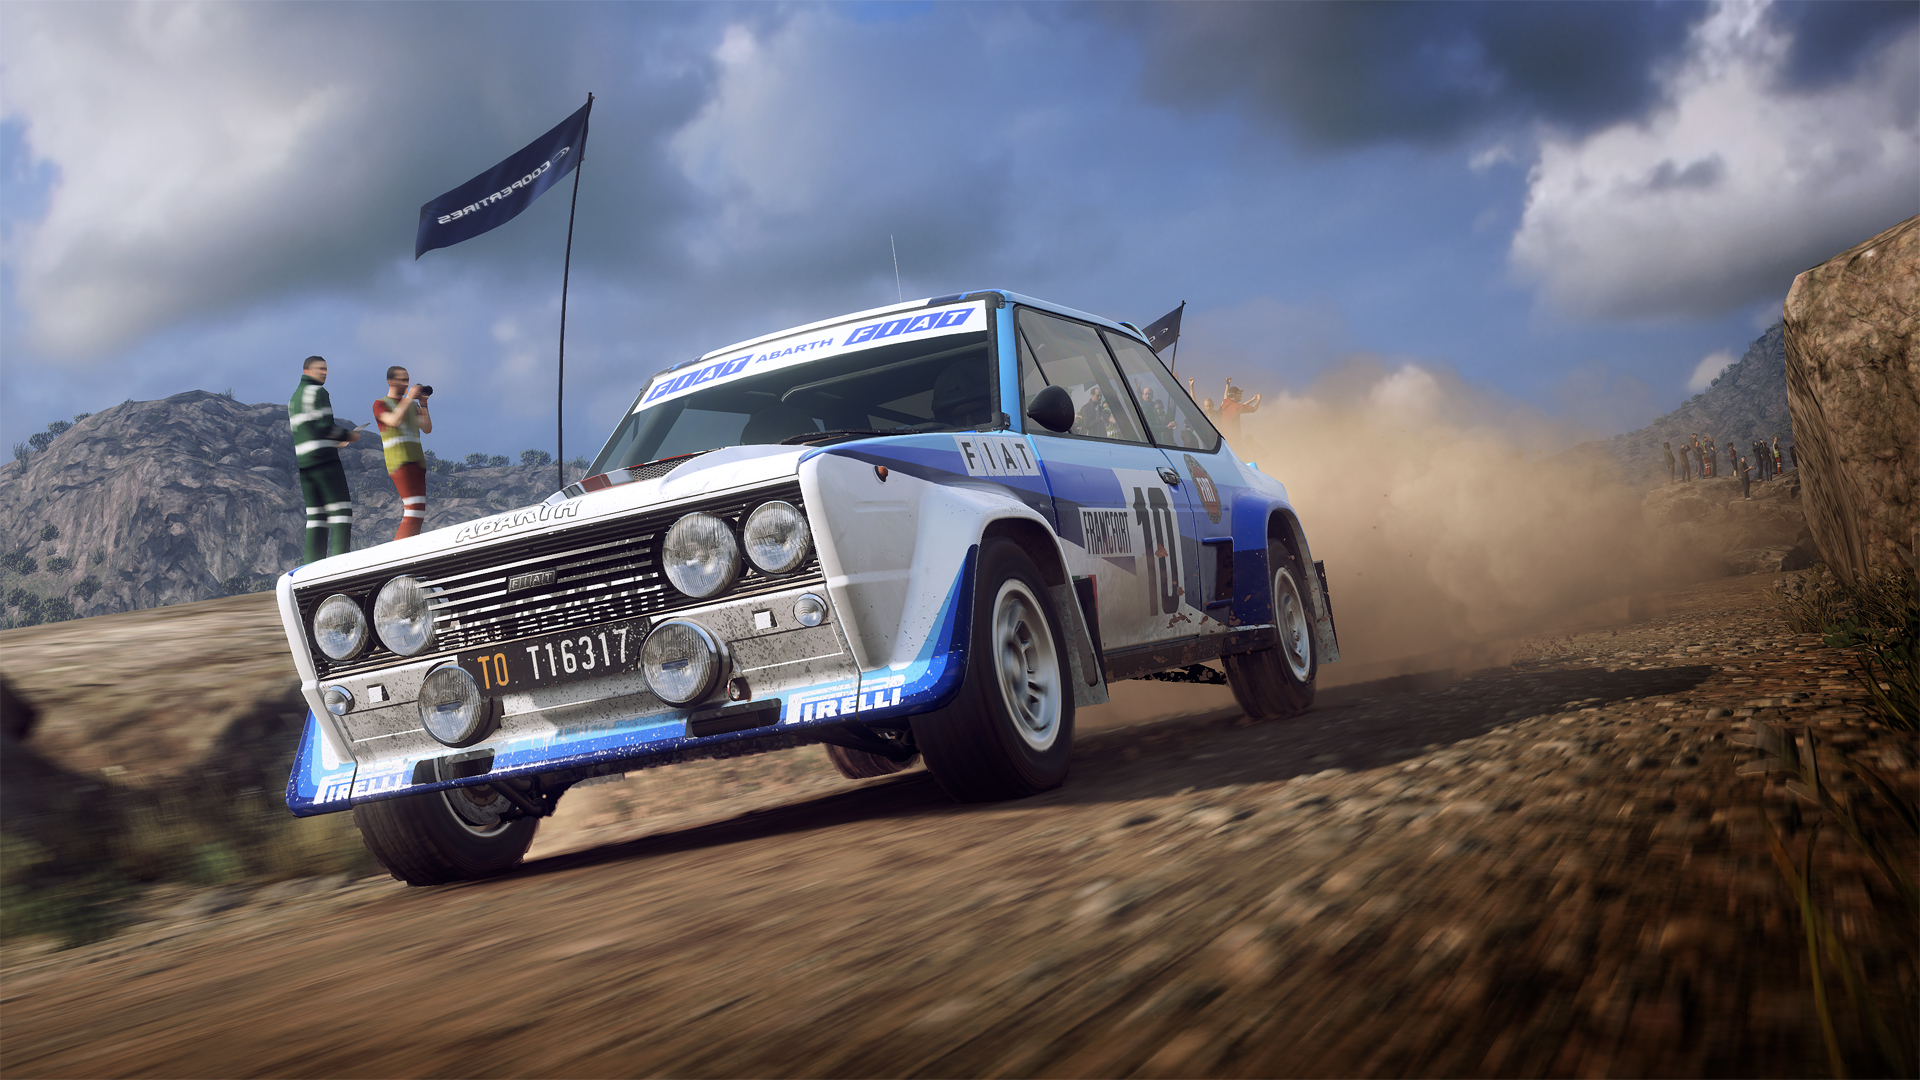 DiRT Rally 2.0 Review - Falling Down the Mountain